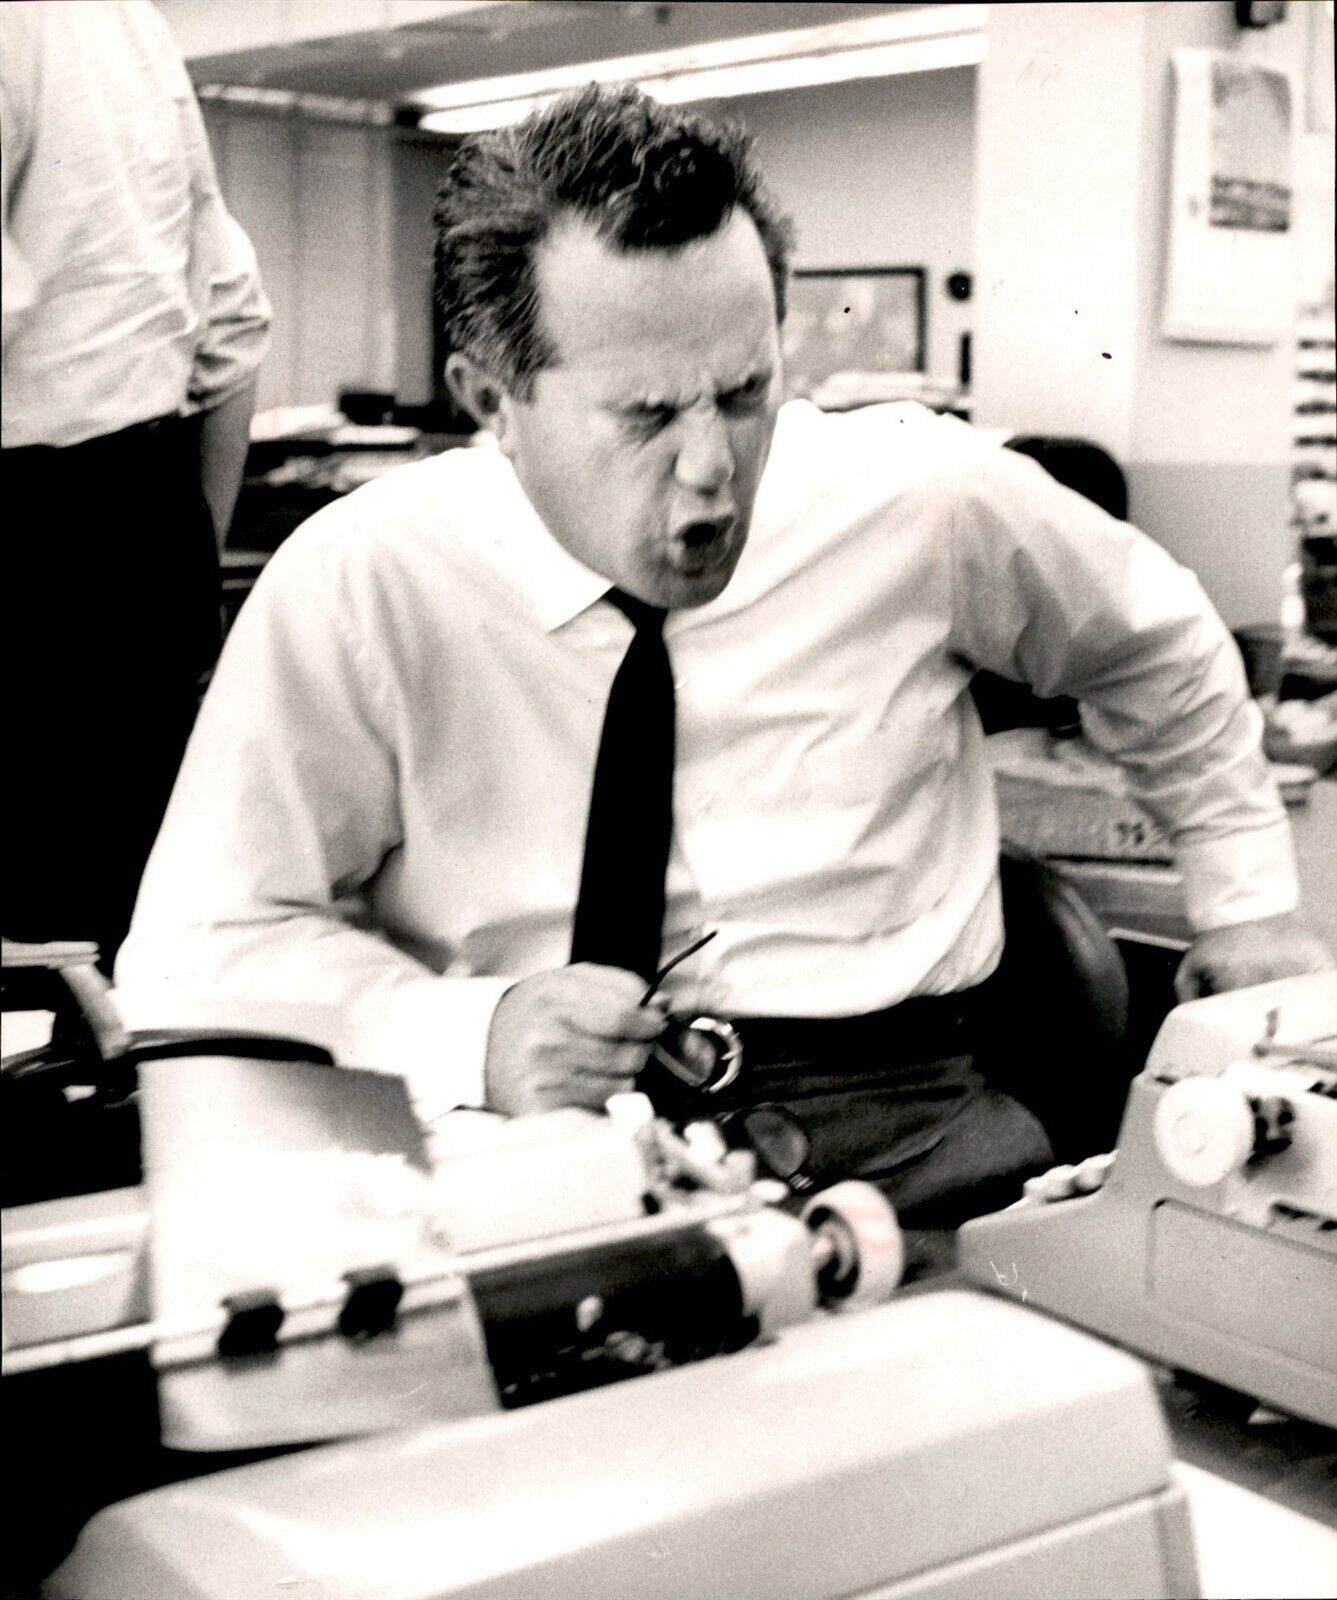 LG55 1965 Original Photo NEWS REPORTER SNEEZING AT DESK UNKNOWN HOLLYWOOD ACTOR